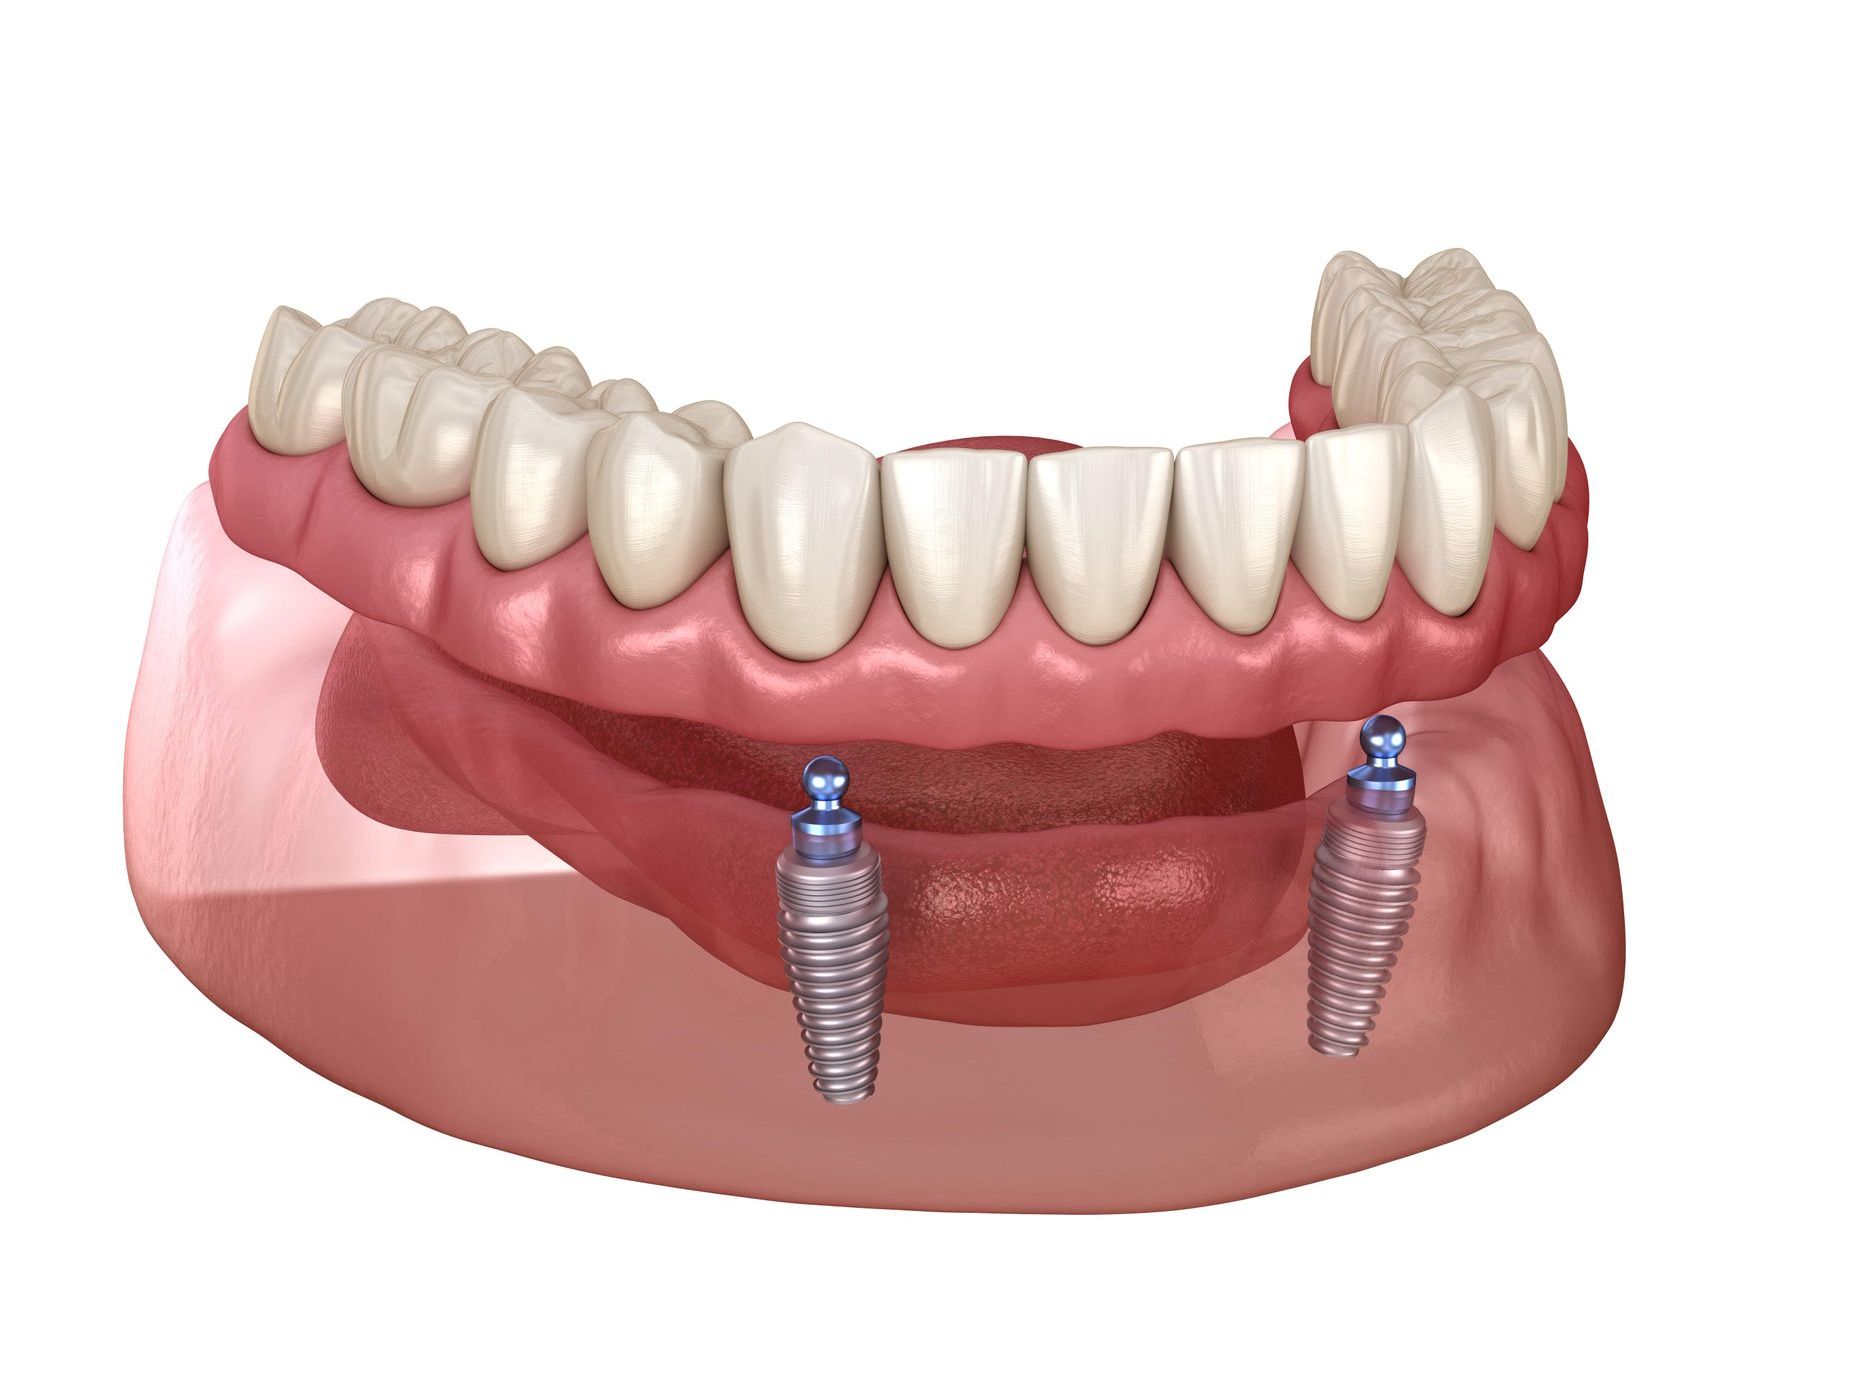 Computer generated image of an implant-supported denture on the bottom jaw